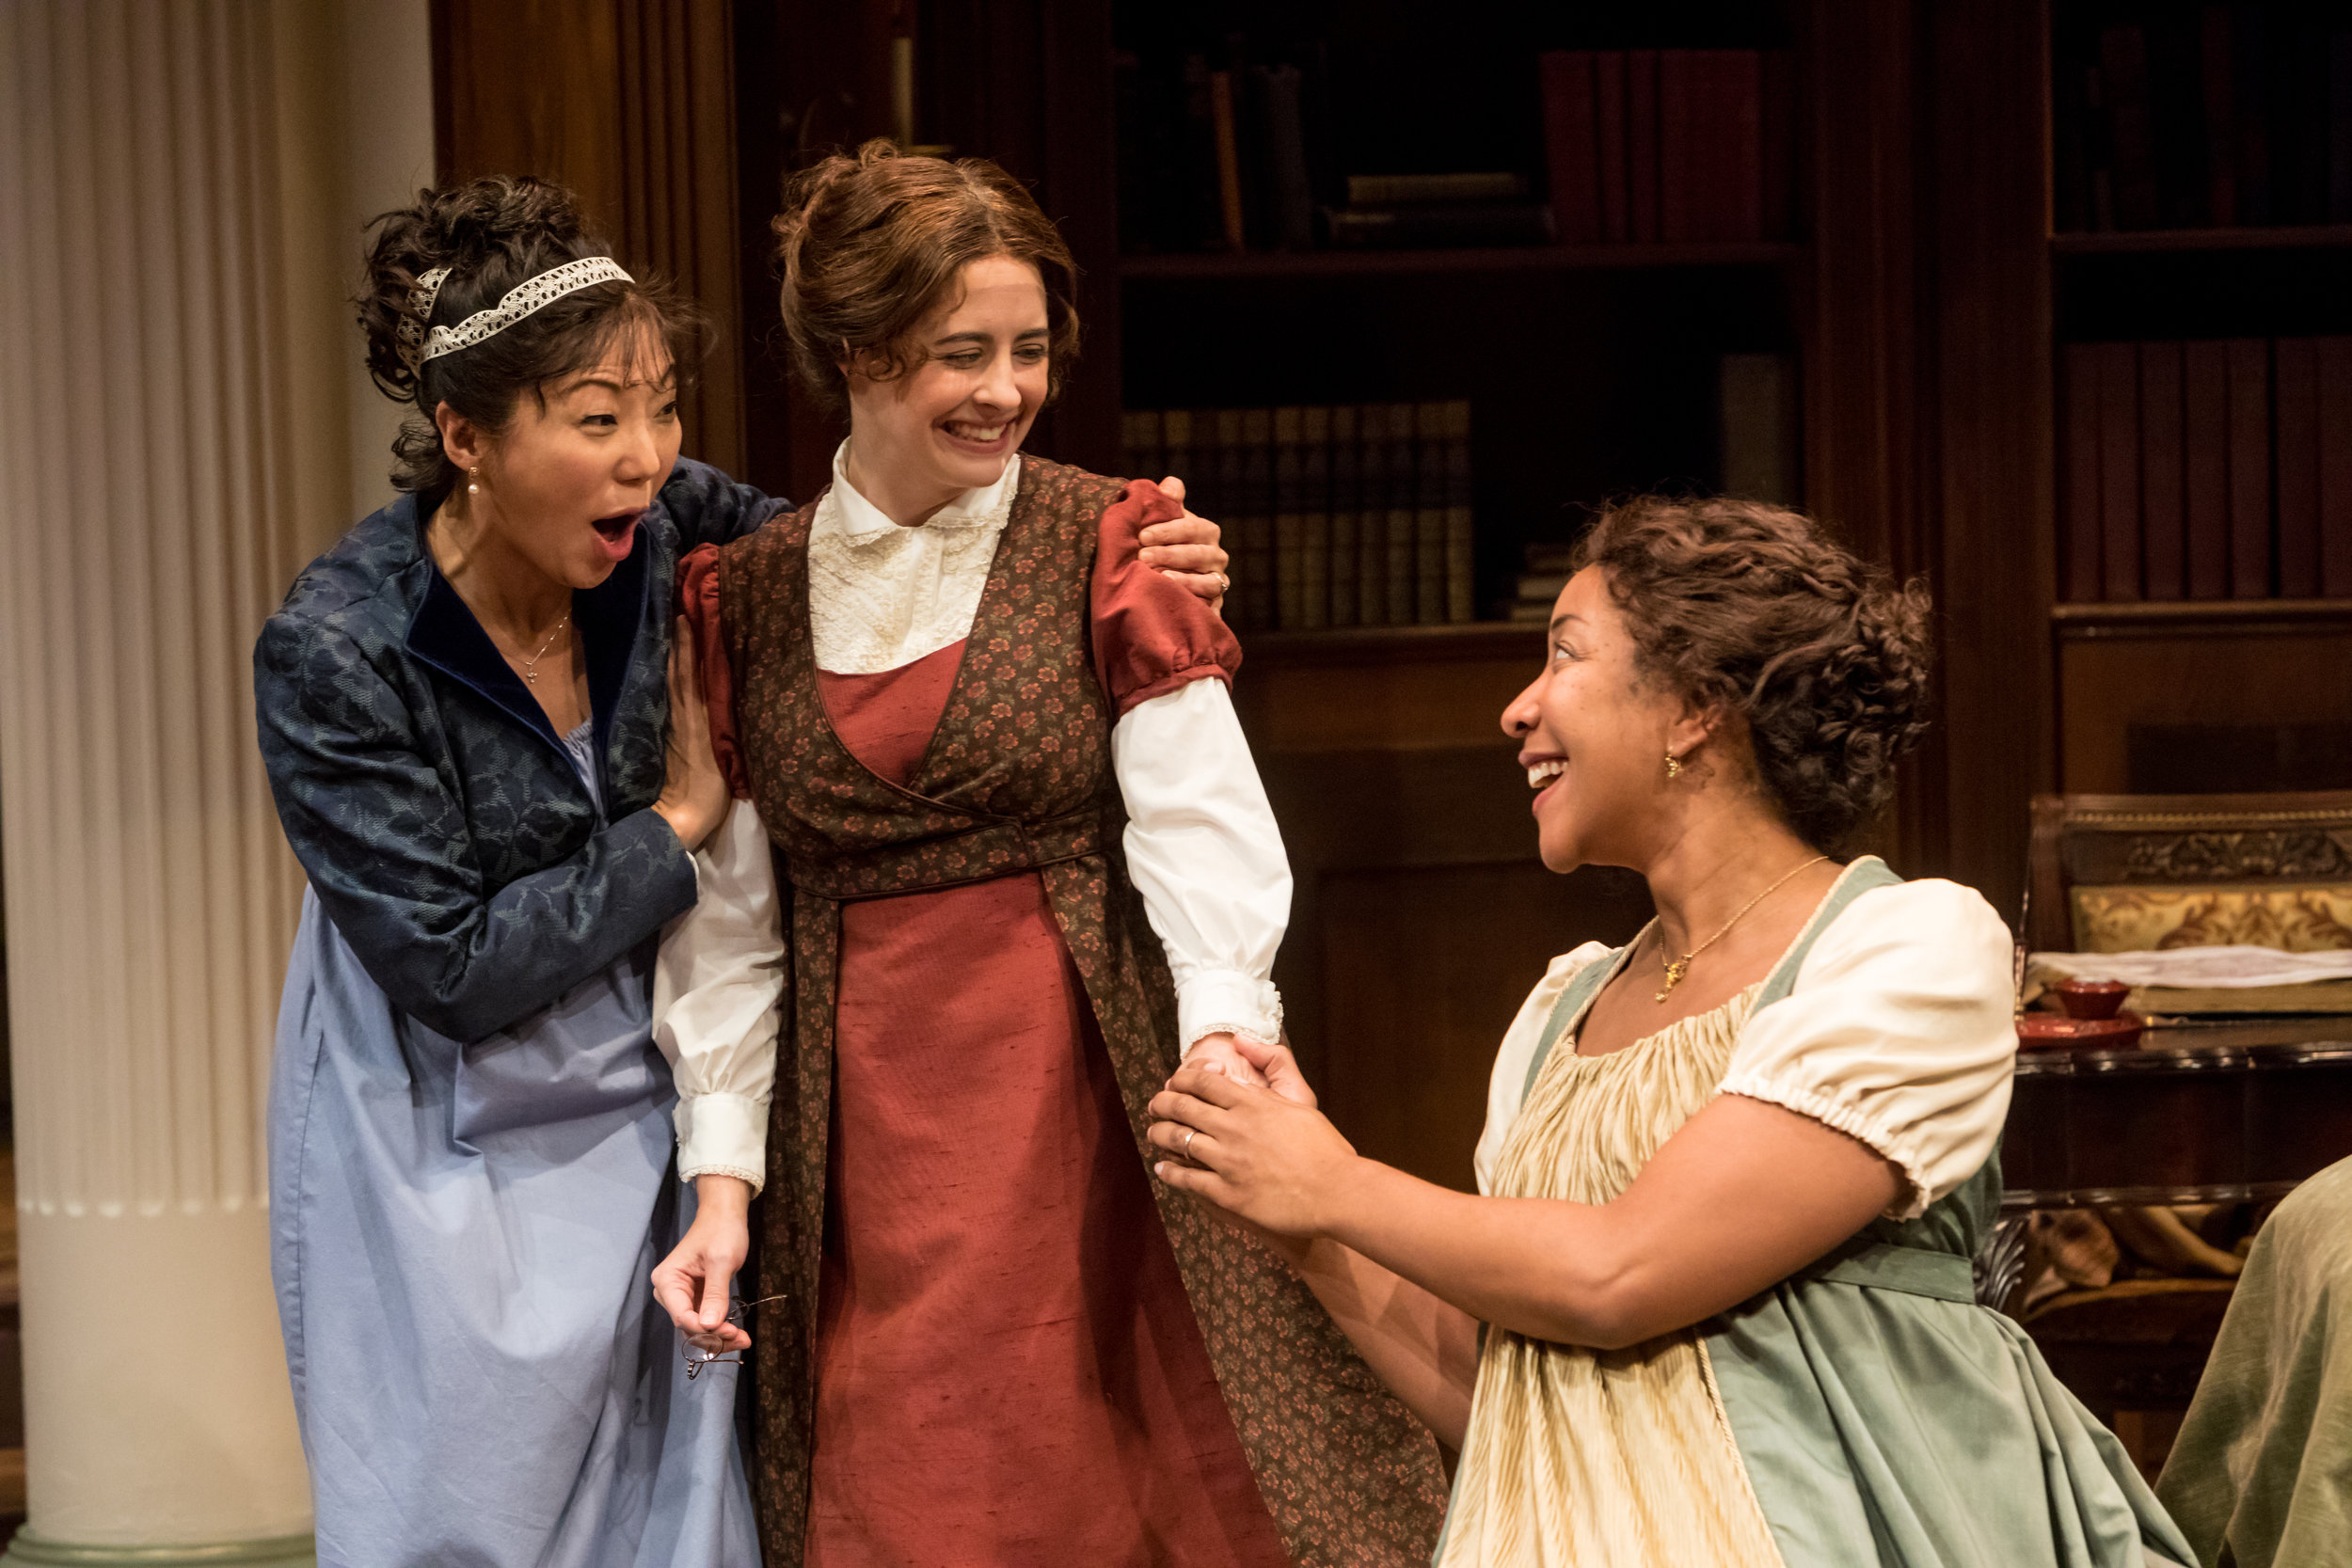 3 women in period clothing laughing